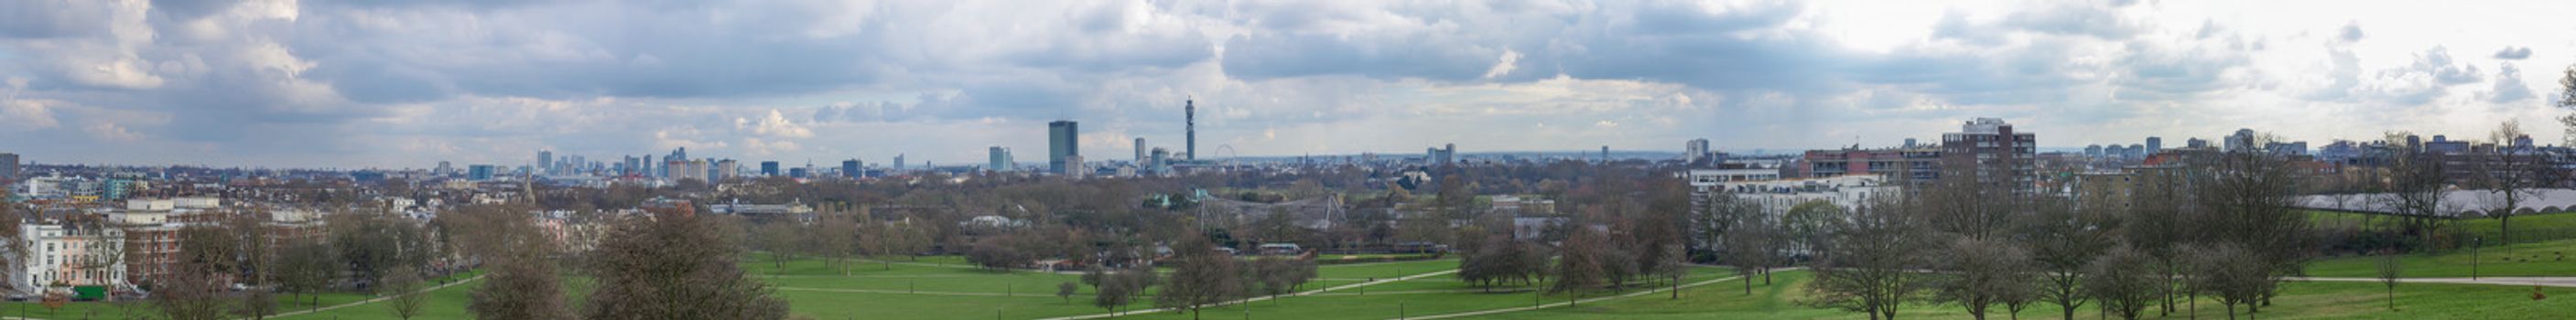 London panorama seen from Primrose Hill in London England UK